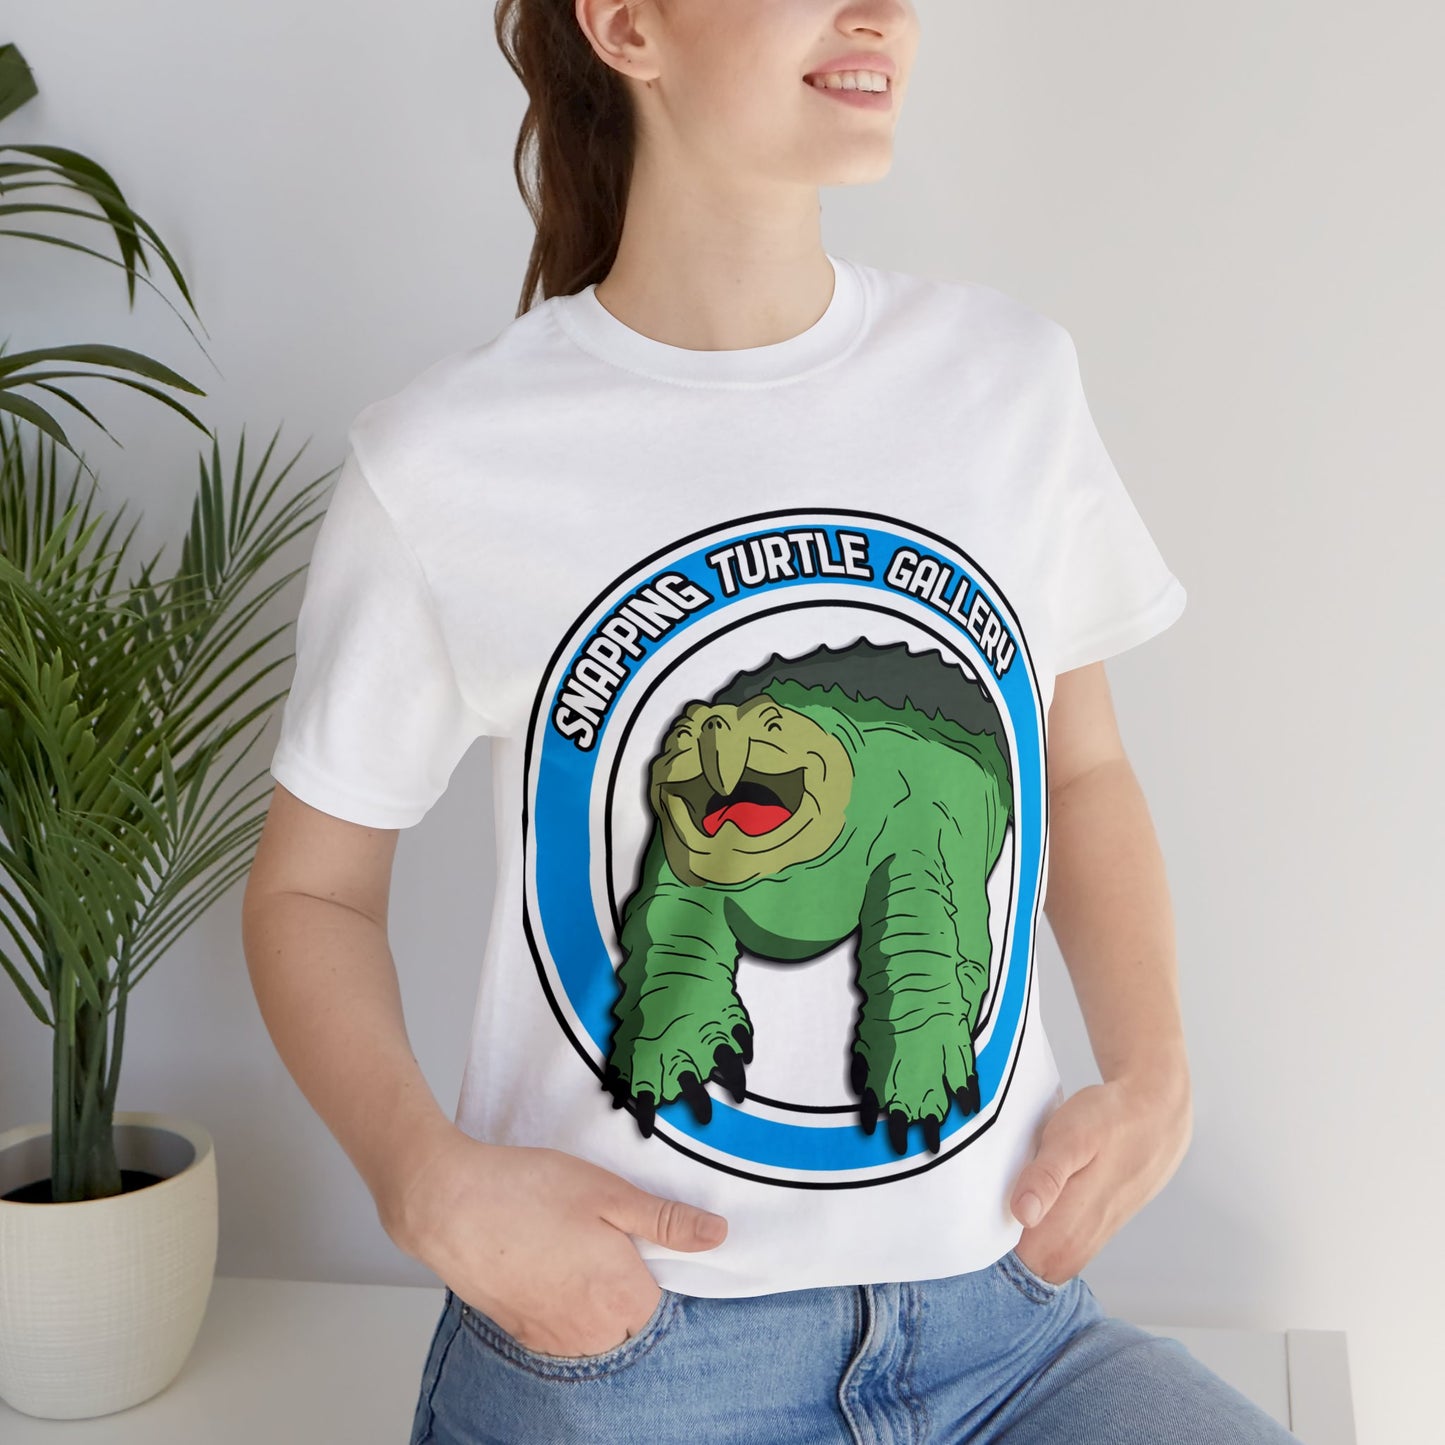 Snapping Turtle gallery Logo Shirt